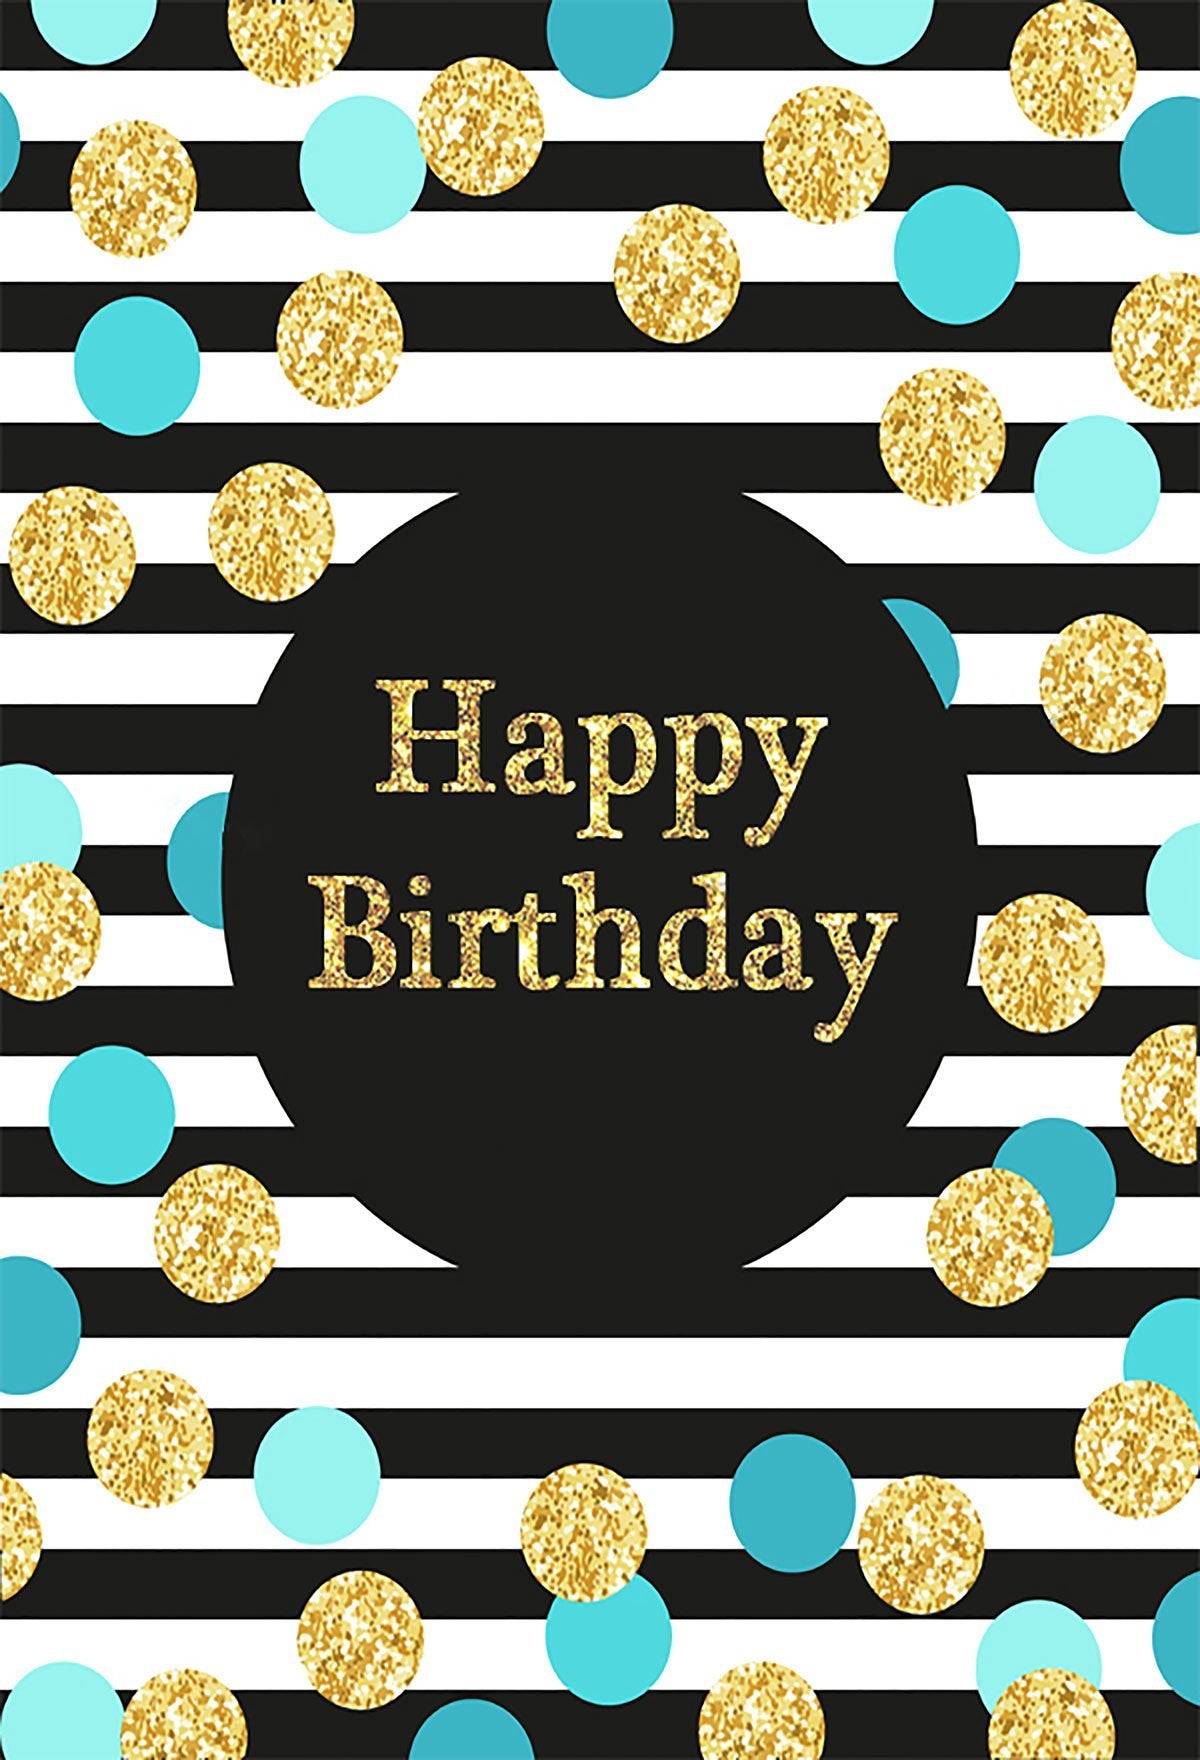 Birthday Party Black and White Stripe Backdrop with blue  golden  Dots - Kate backdrops UK